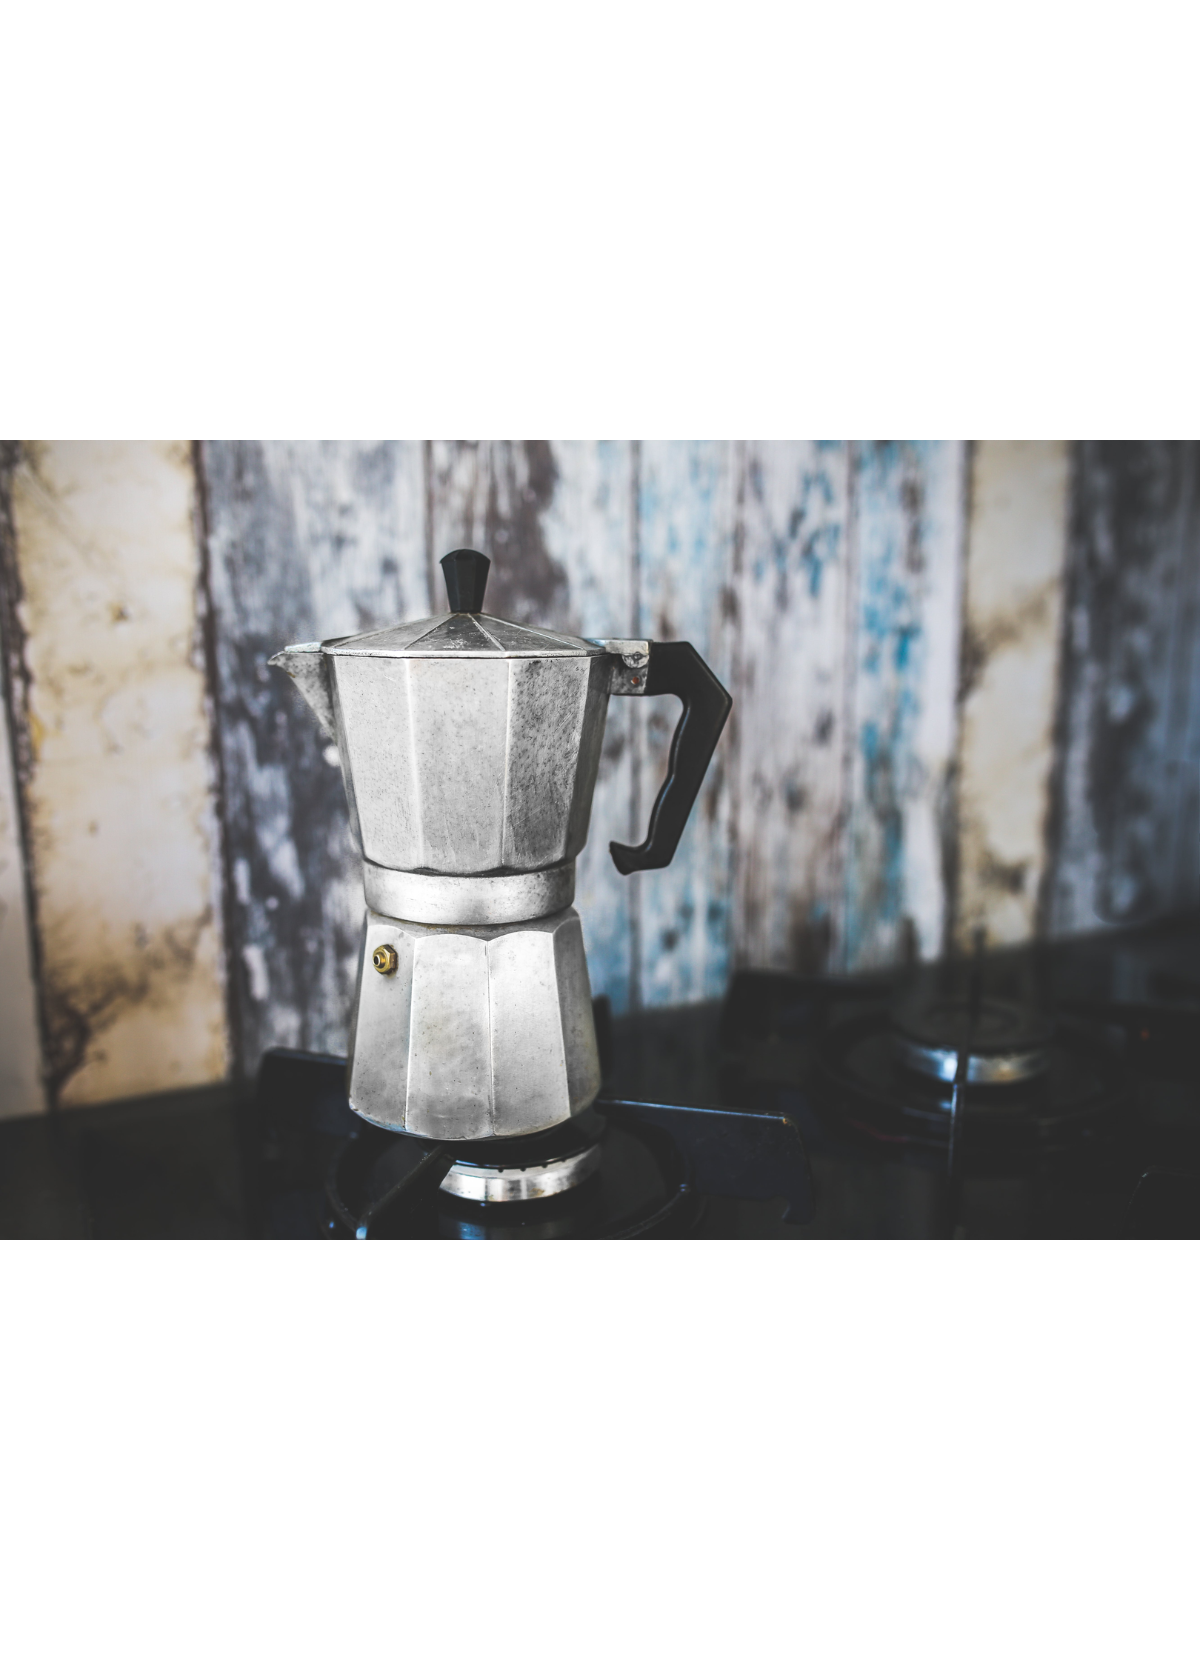 Brewing Bliss: The 5 Best Coffee Percolator Reviews!